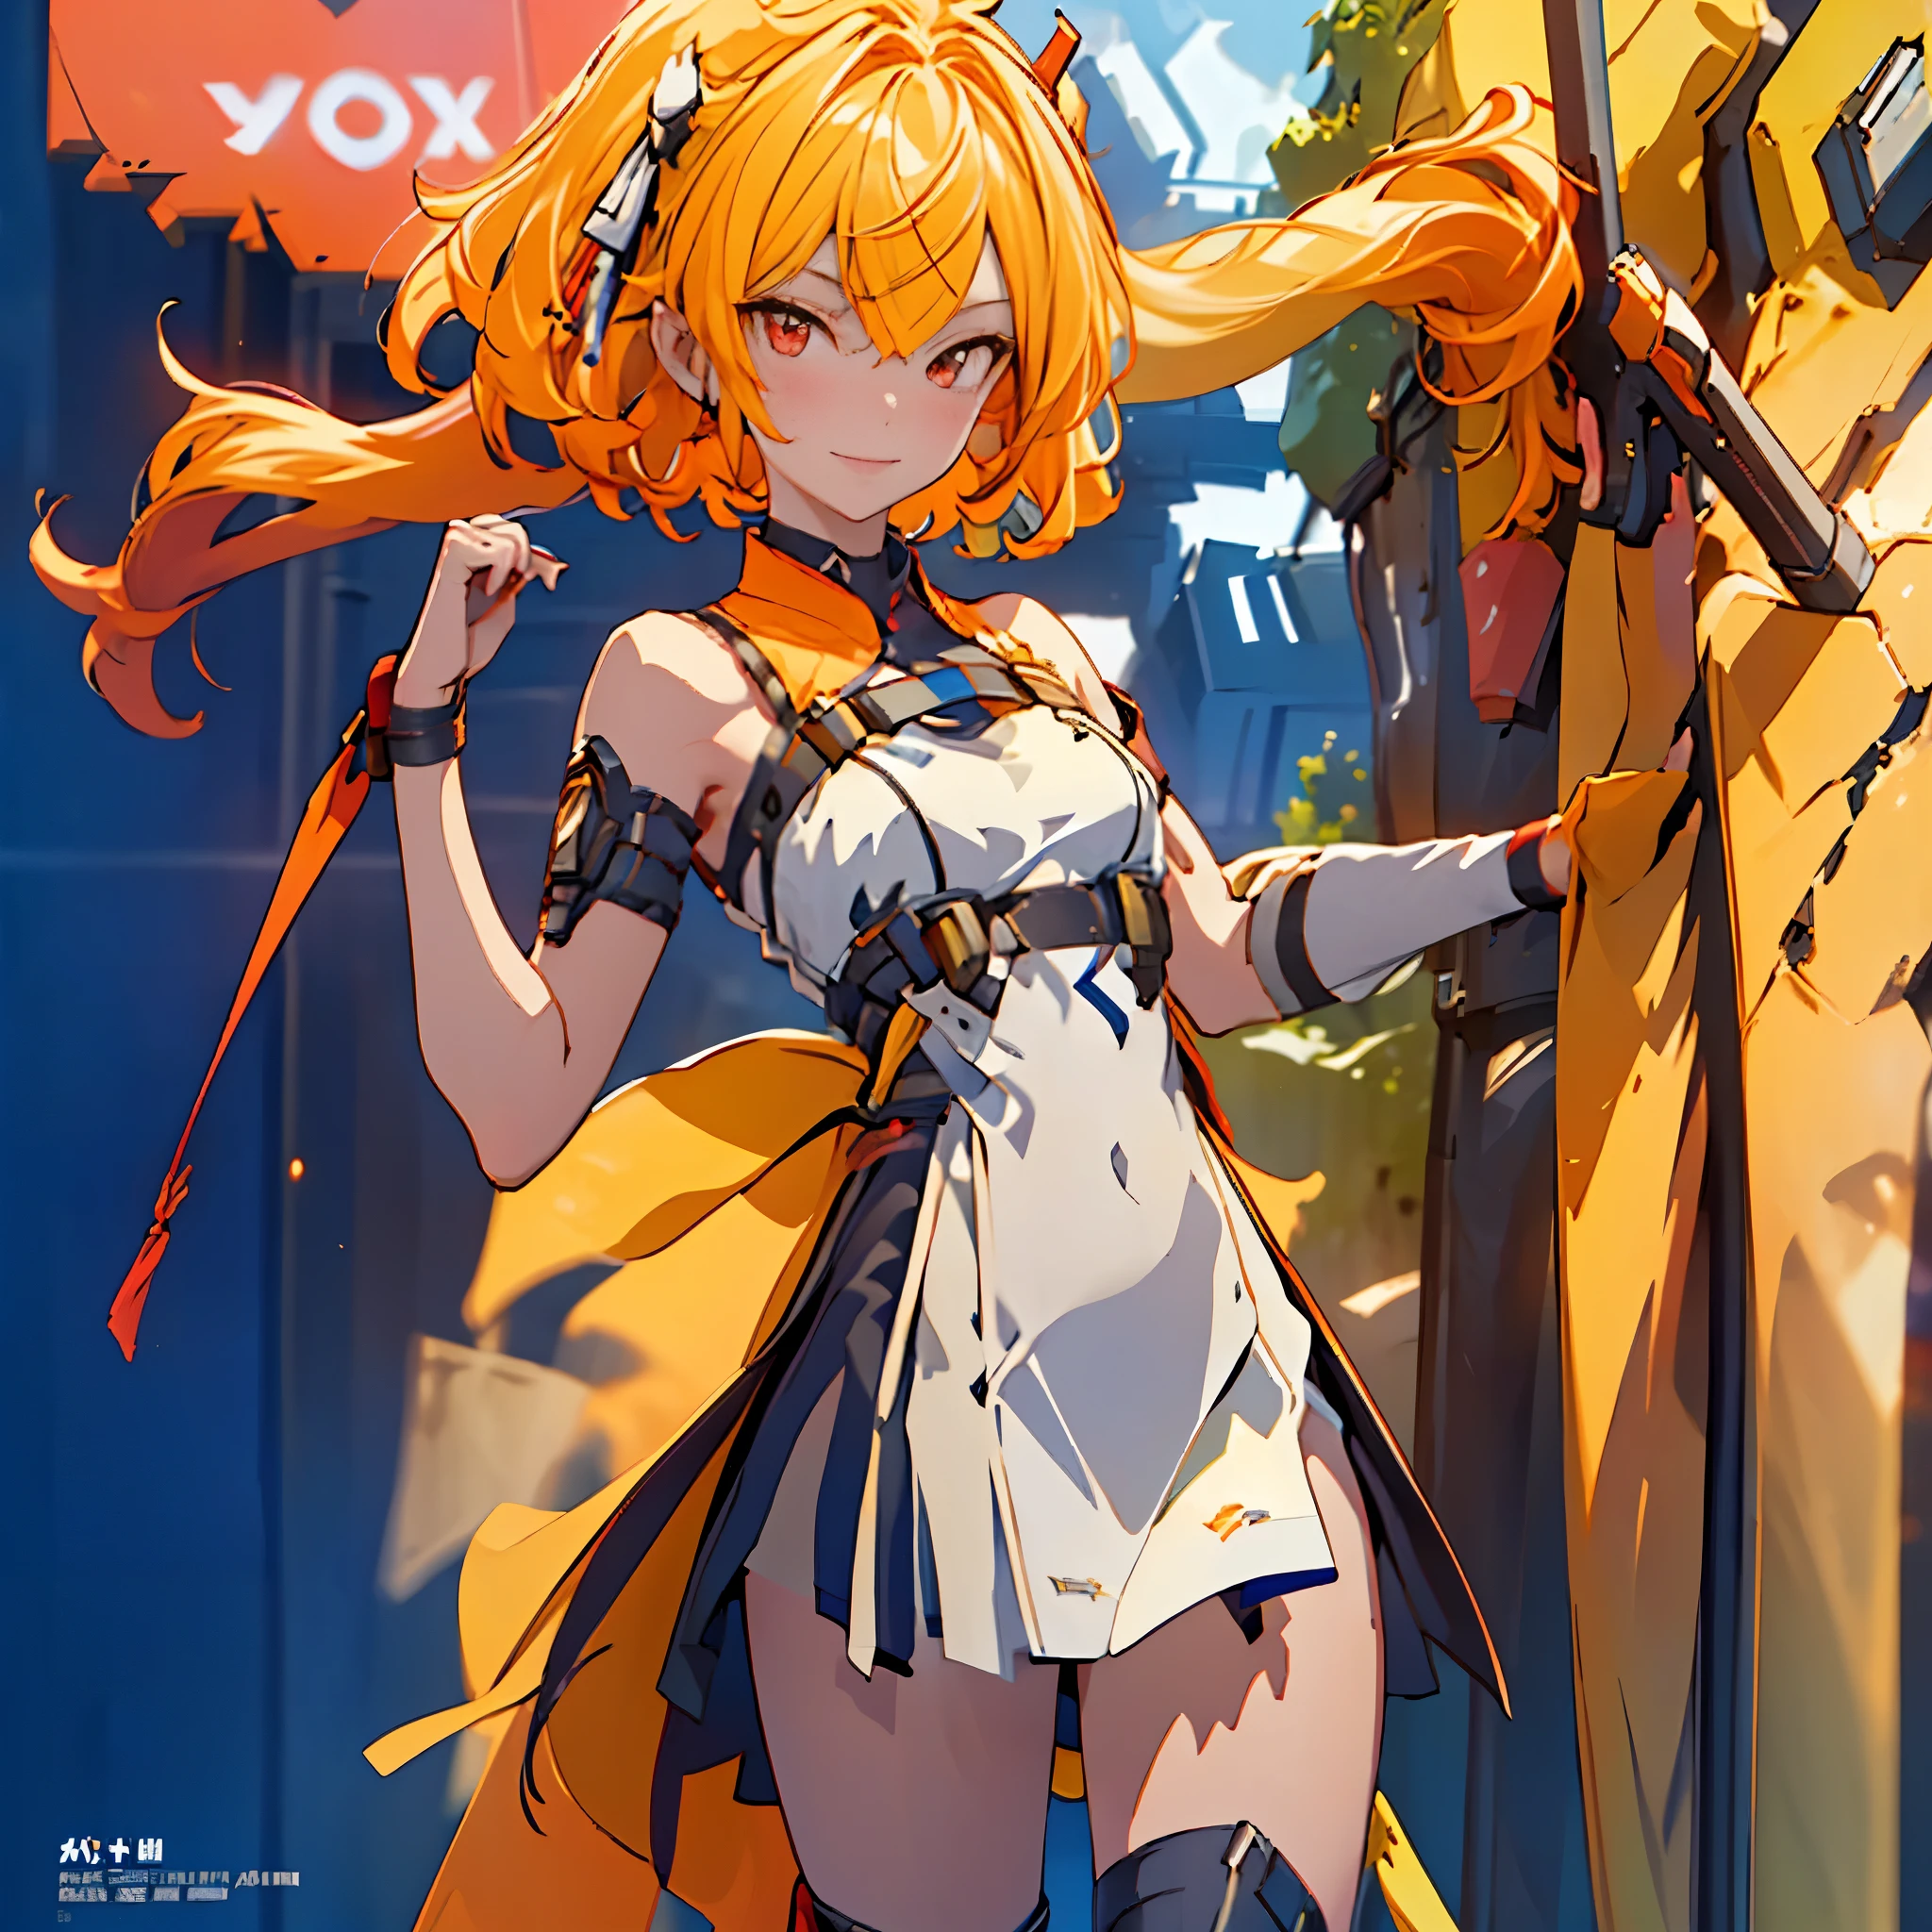 1 girl, tie up hair, short hair, short blond hair, red eyes, innocent smile, black mech armor, cool and sexy face, black thigh knee sock, Sharp face, Yellow ribbon, battlefield, outside, black crown,  standing, ,Fenny Coronet, Shotgun , one person, alone, 1 head, 2 hands, 2 legs , High Res , UHD , 4k , 8k ,The text is bold and eye-catching，With catchy slogans，Adds to the overall drama and excitement。The color palette is dominated by dark colors, poster , magazine cover ，Make the poster dynamic and visually striking，(Magazines:1.3), (Cover-style:1.3)